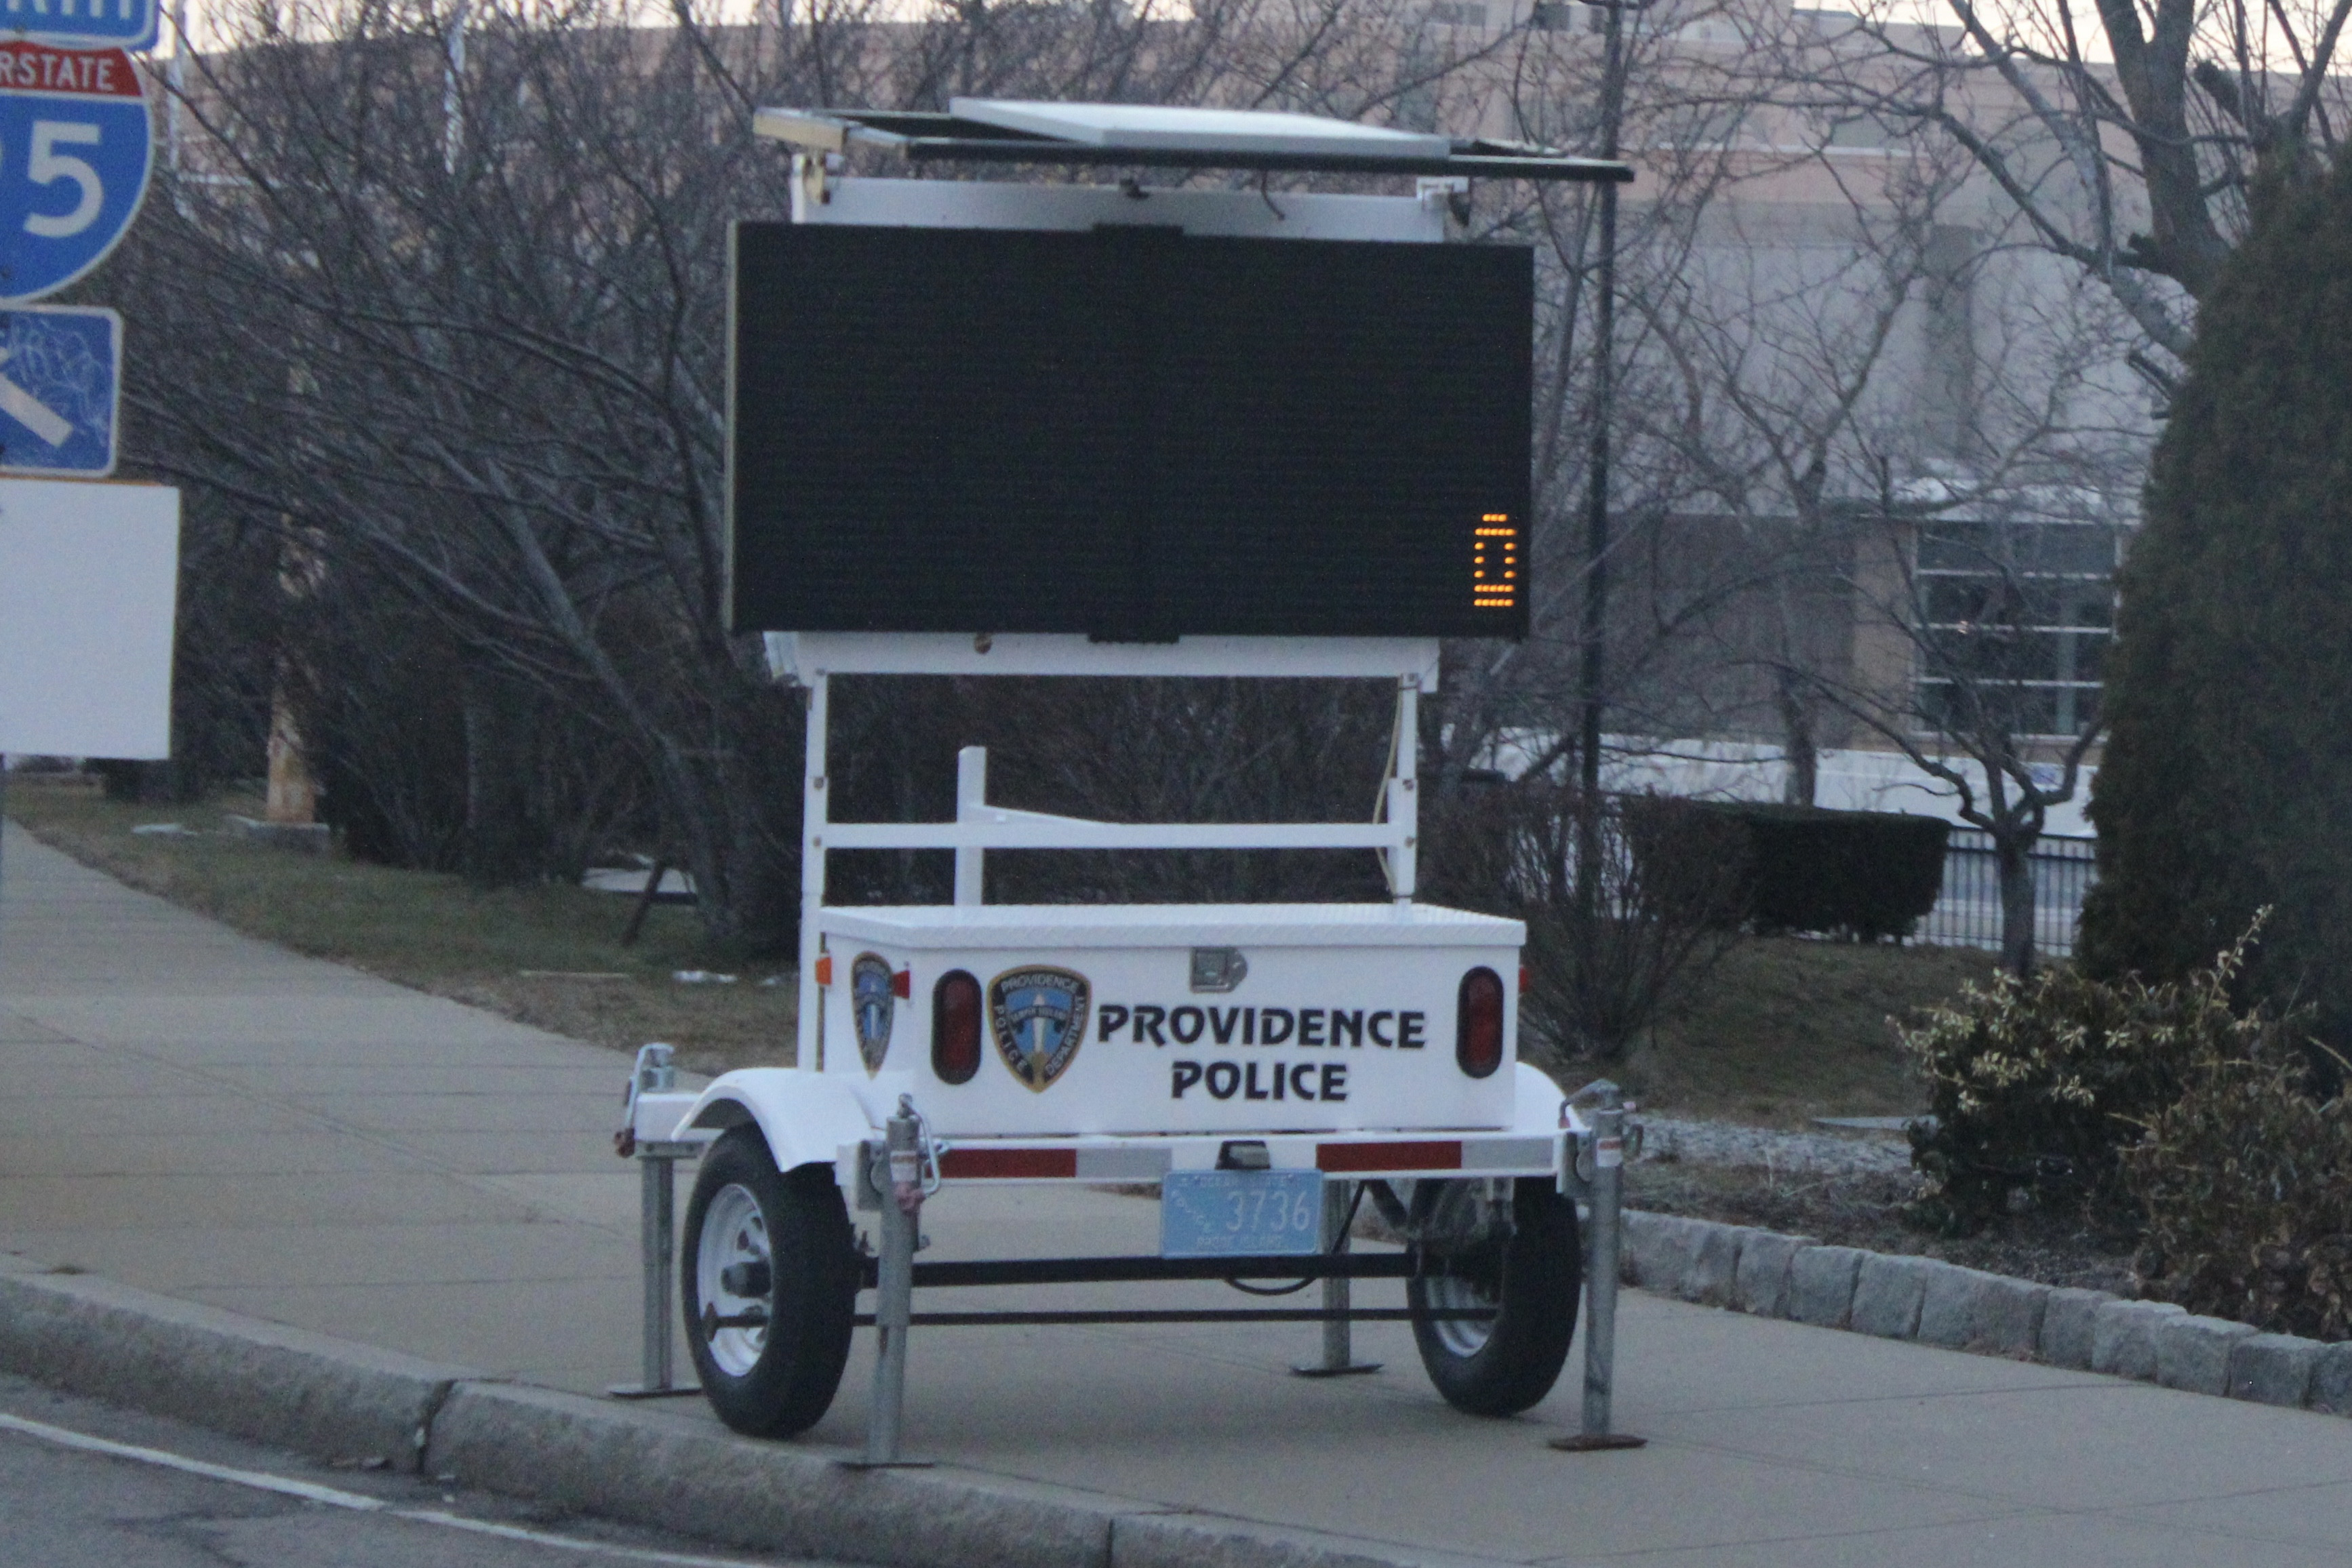 A photo  of Providence Police
            Message Trailer 3736, a 2006-2011 All Traffic Solutions Message Trailer             taken by @riemergencyvehicles